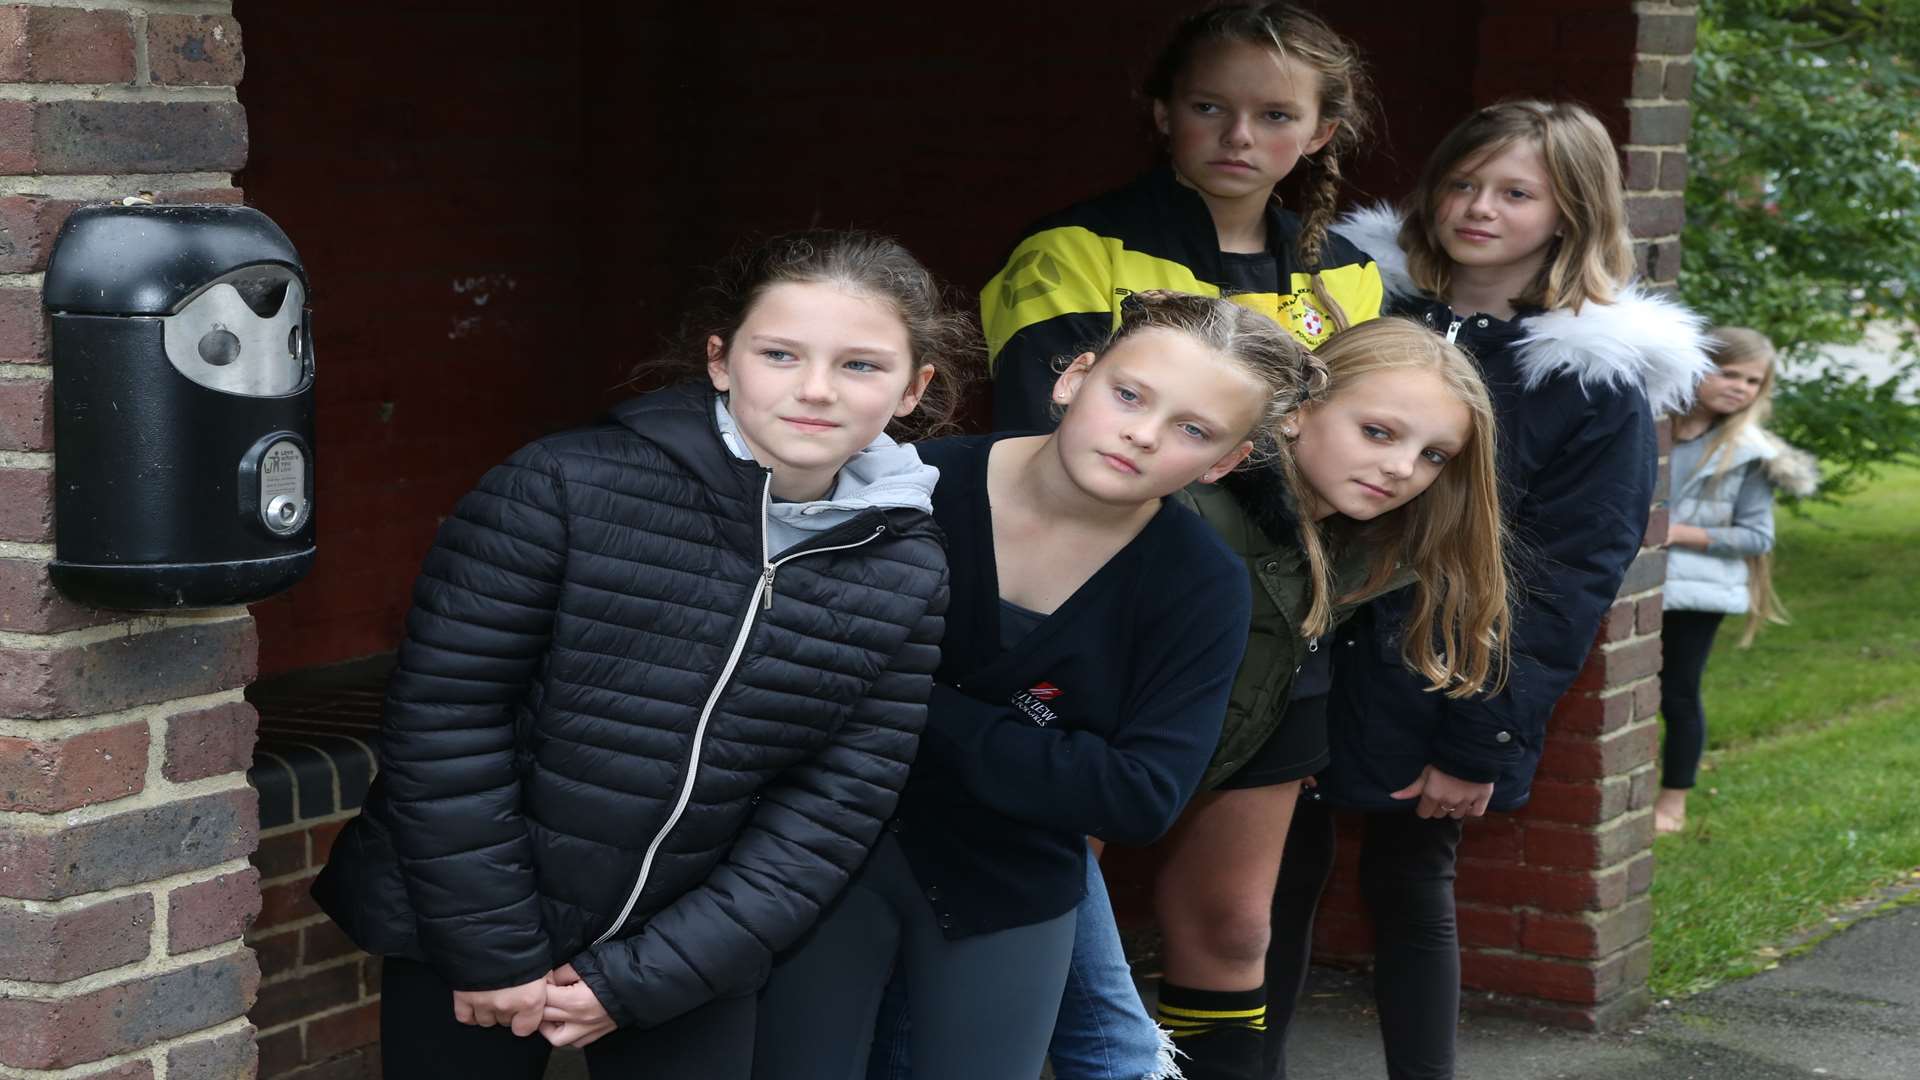 Erin, Bethan, Lauren, Sadye and Daisy, all 11 at The Wateringbury Hotel Bus stop where they were stranded last week when the school bus did not turn up.